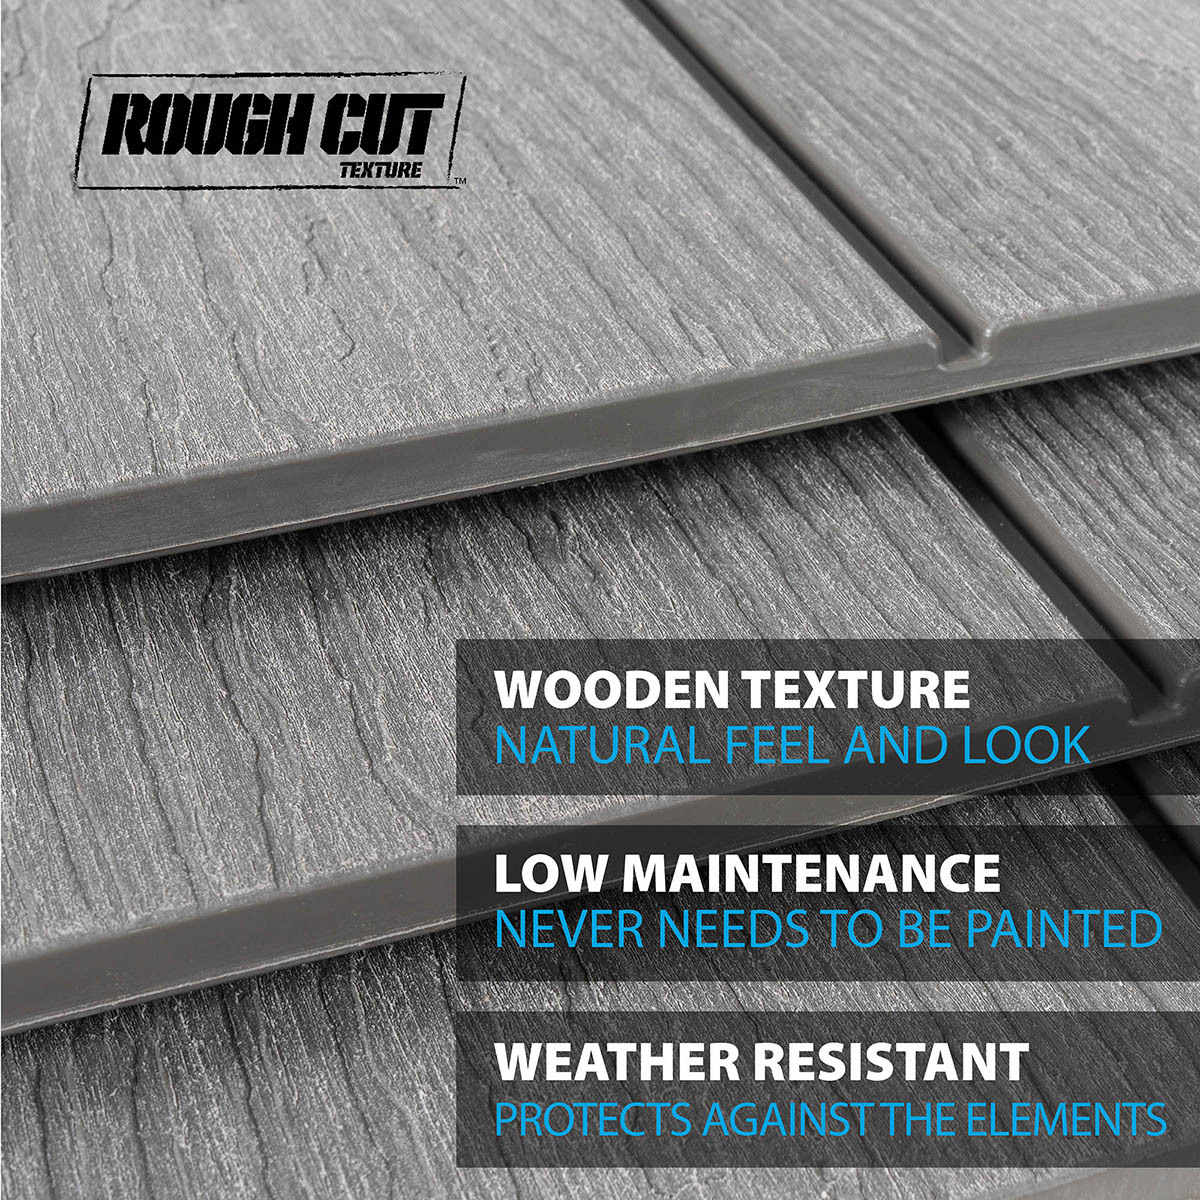 Material features - wooden texture, low maintenance, weather resistant